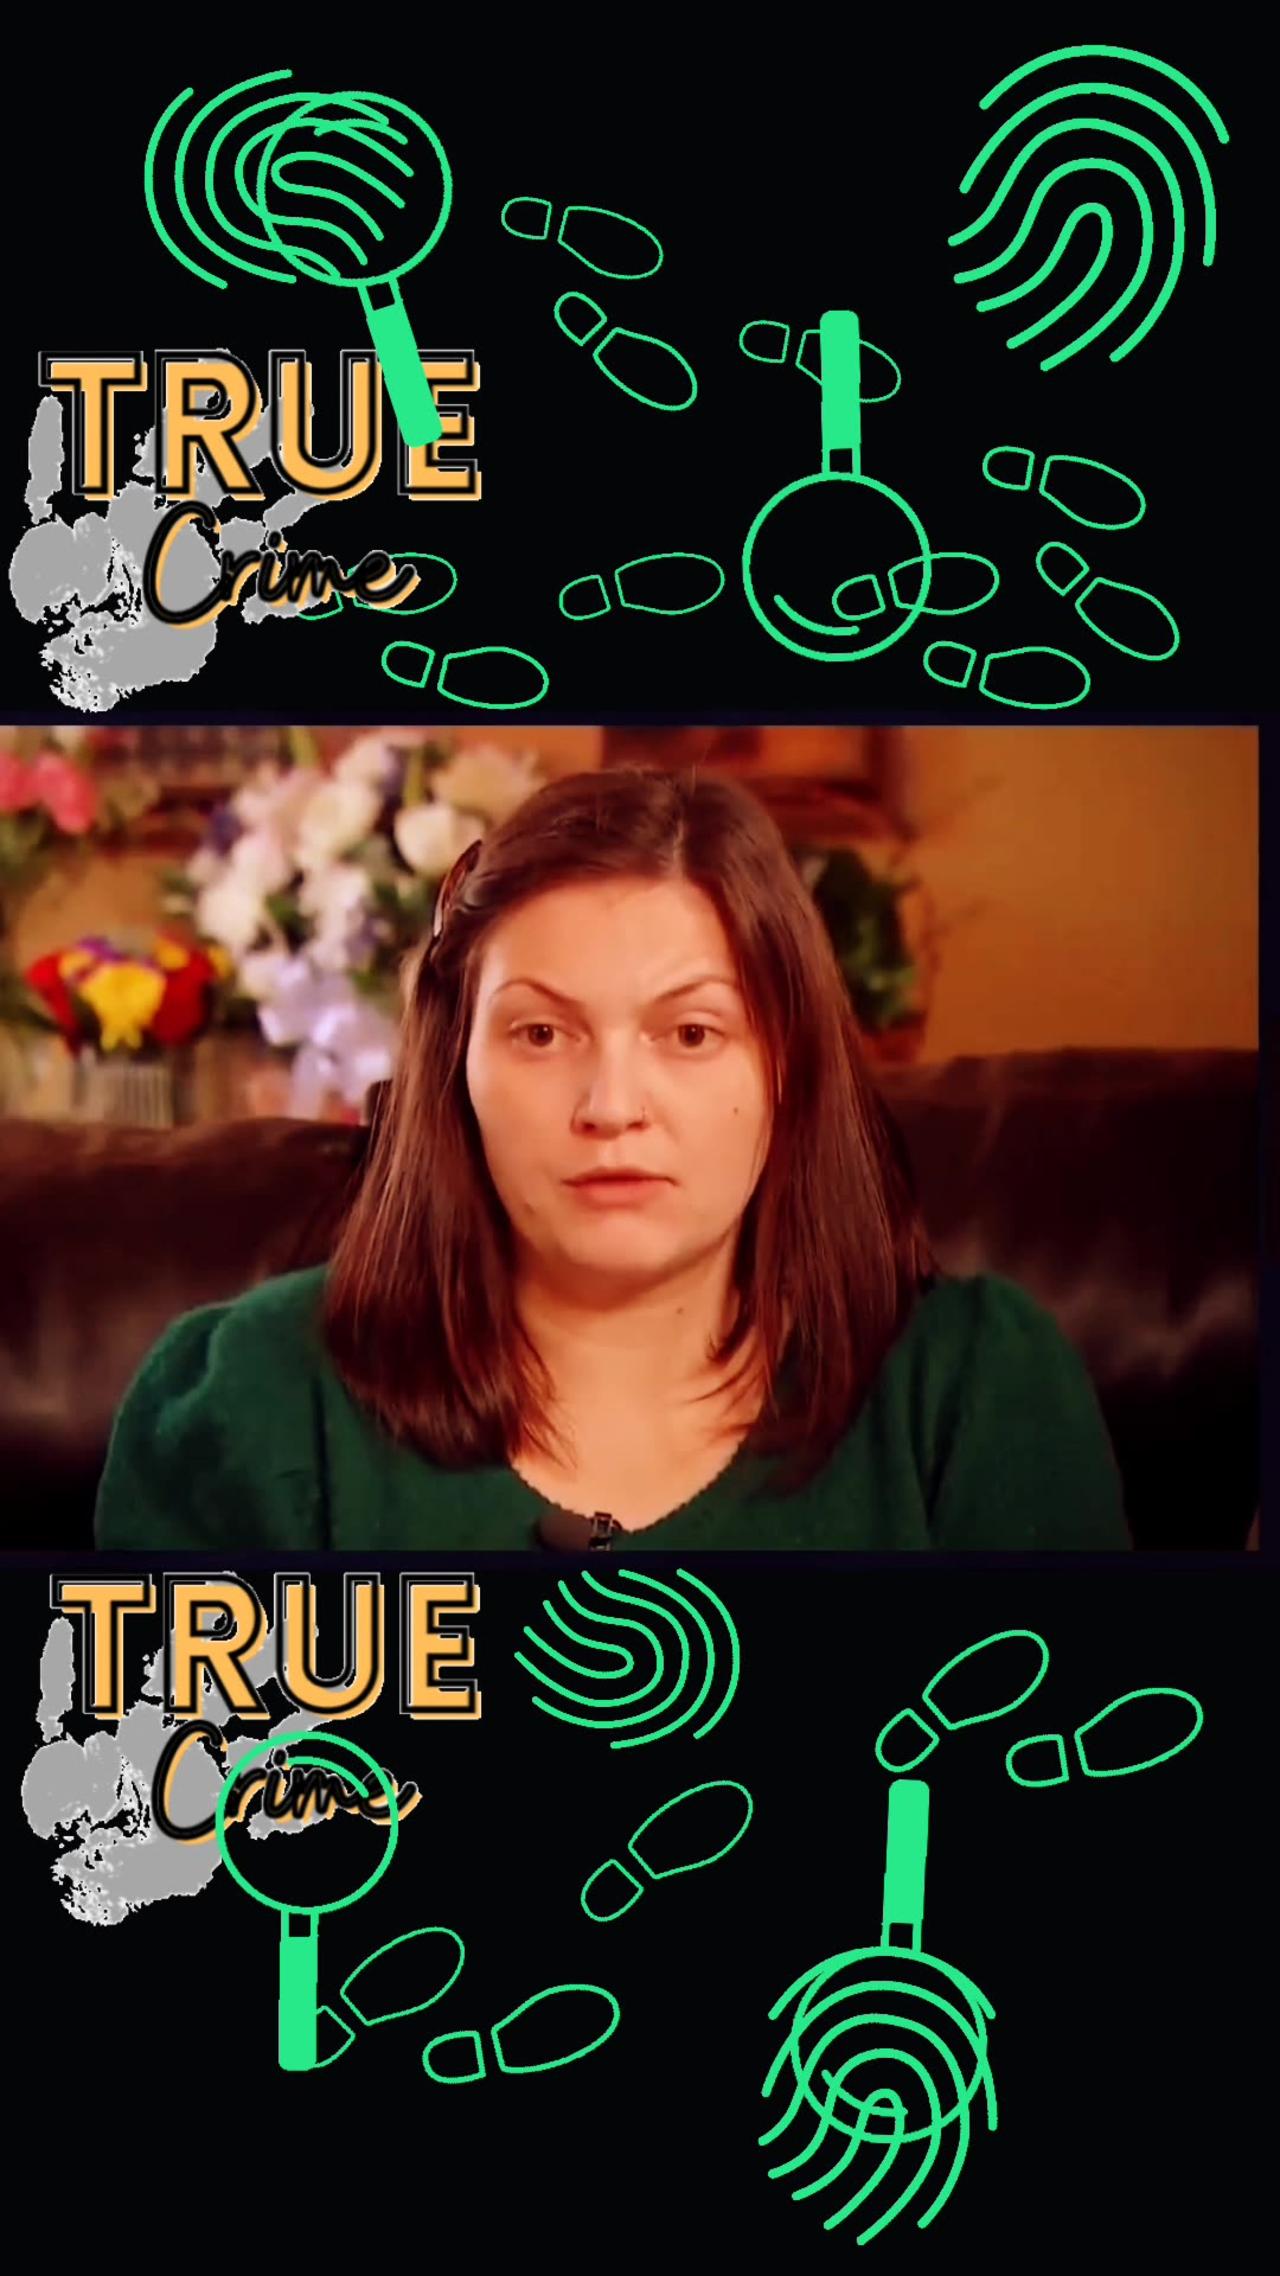 True Crime - Another Short Interview on Timeline of Moscow Idaho